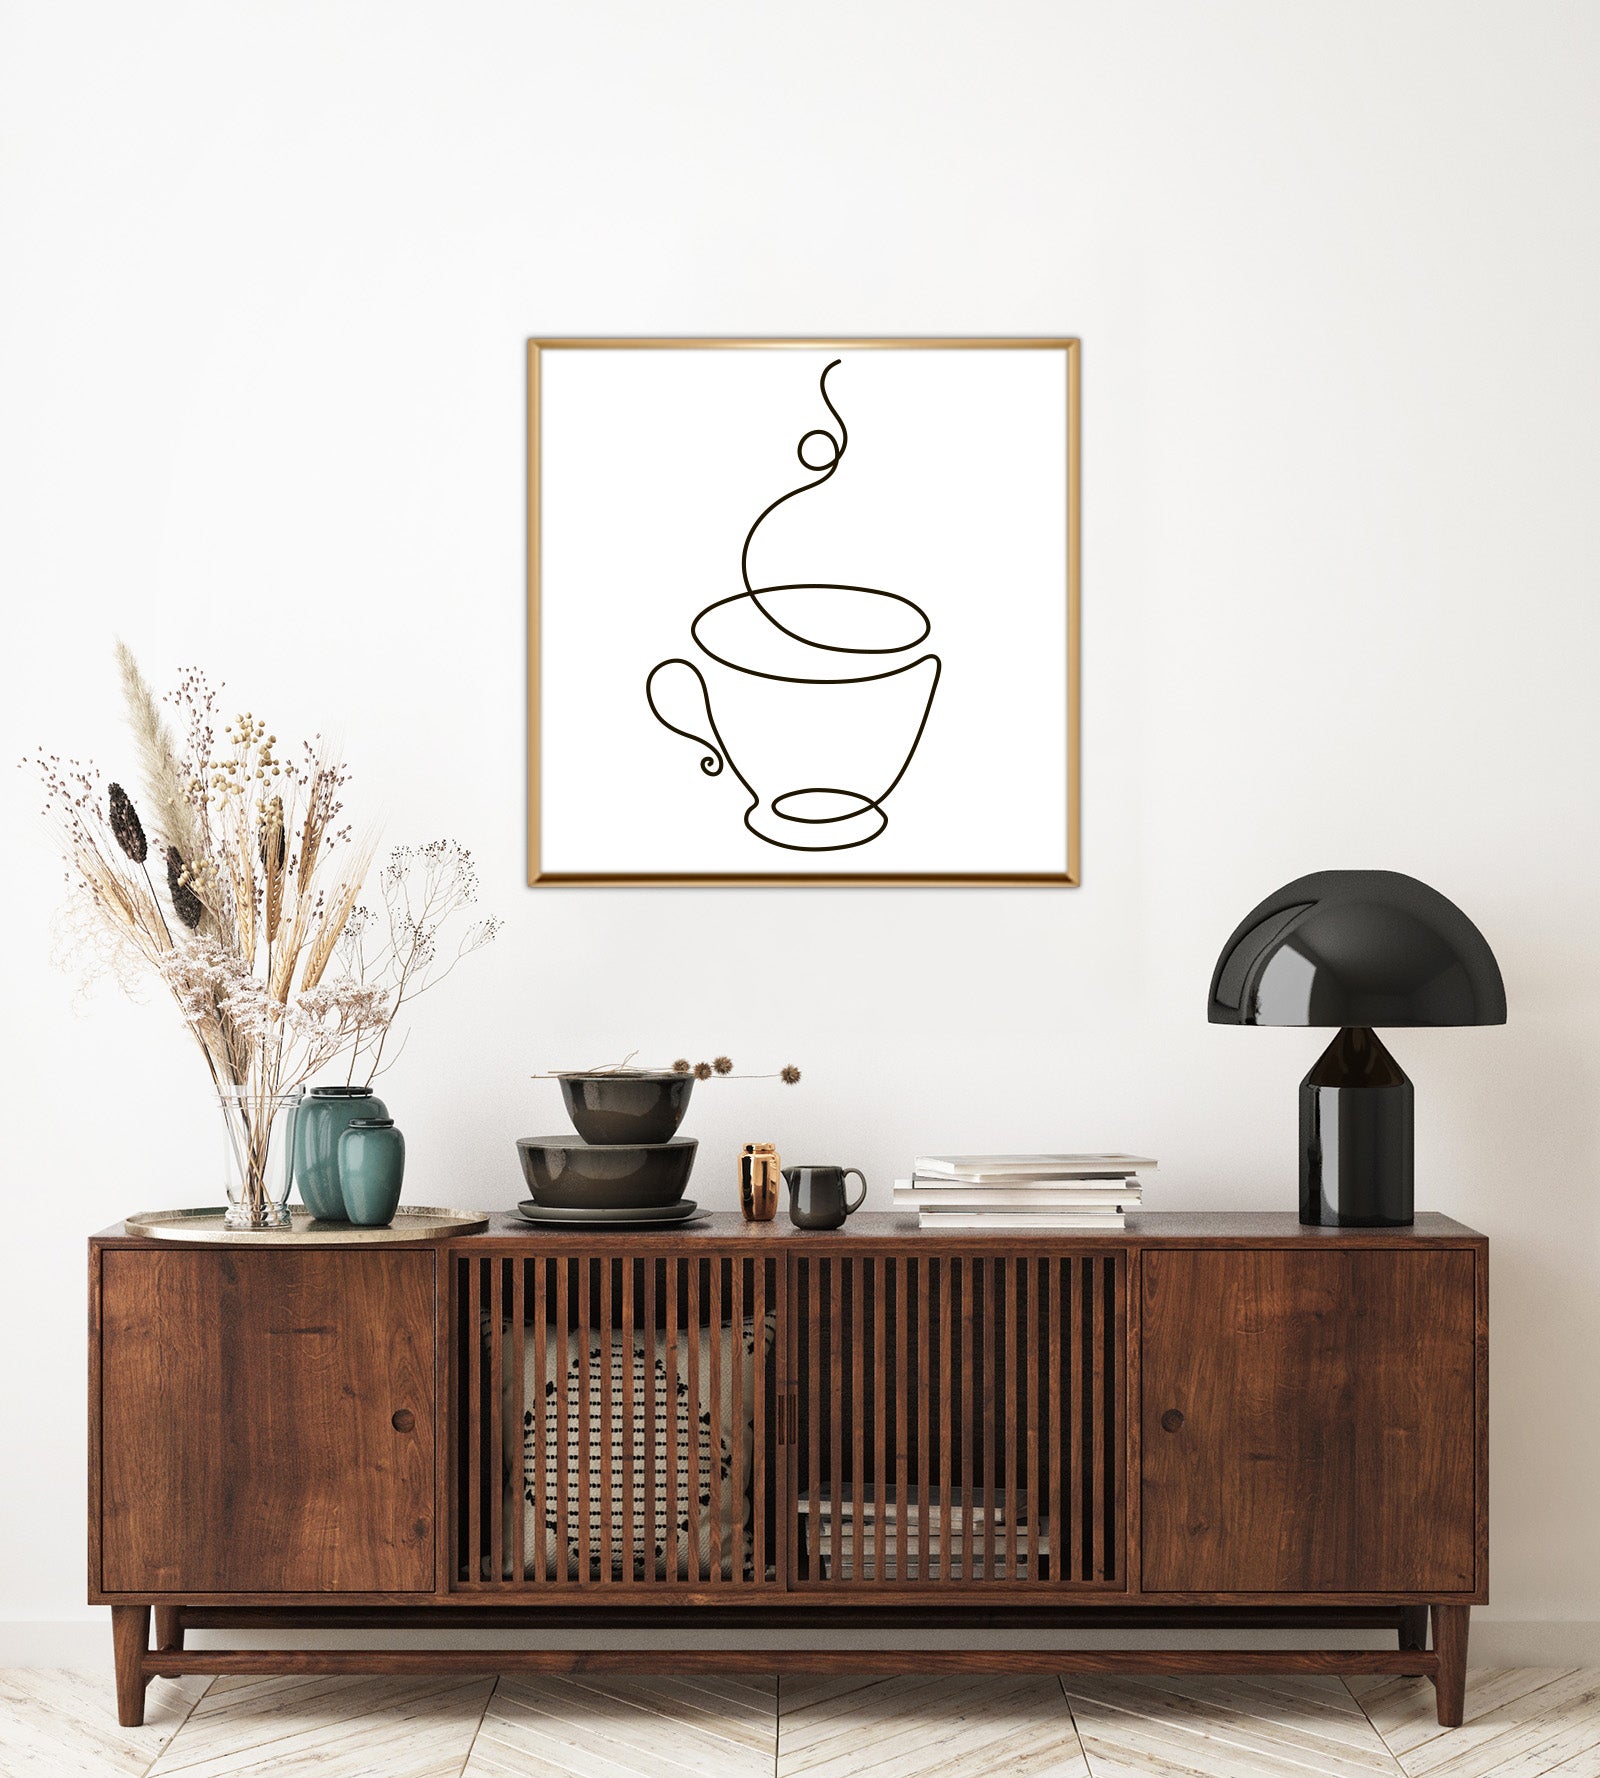 "Line Art Canvas Wall Painting (Cup of Coffee) "